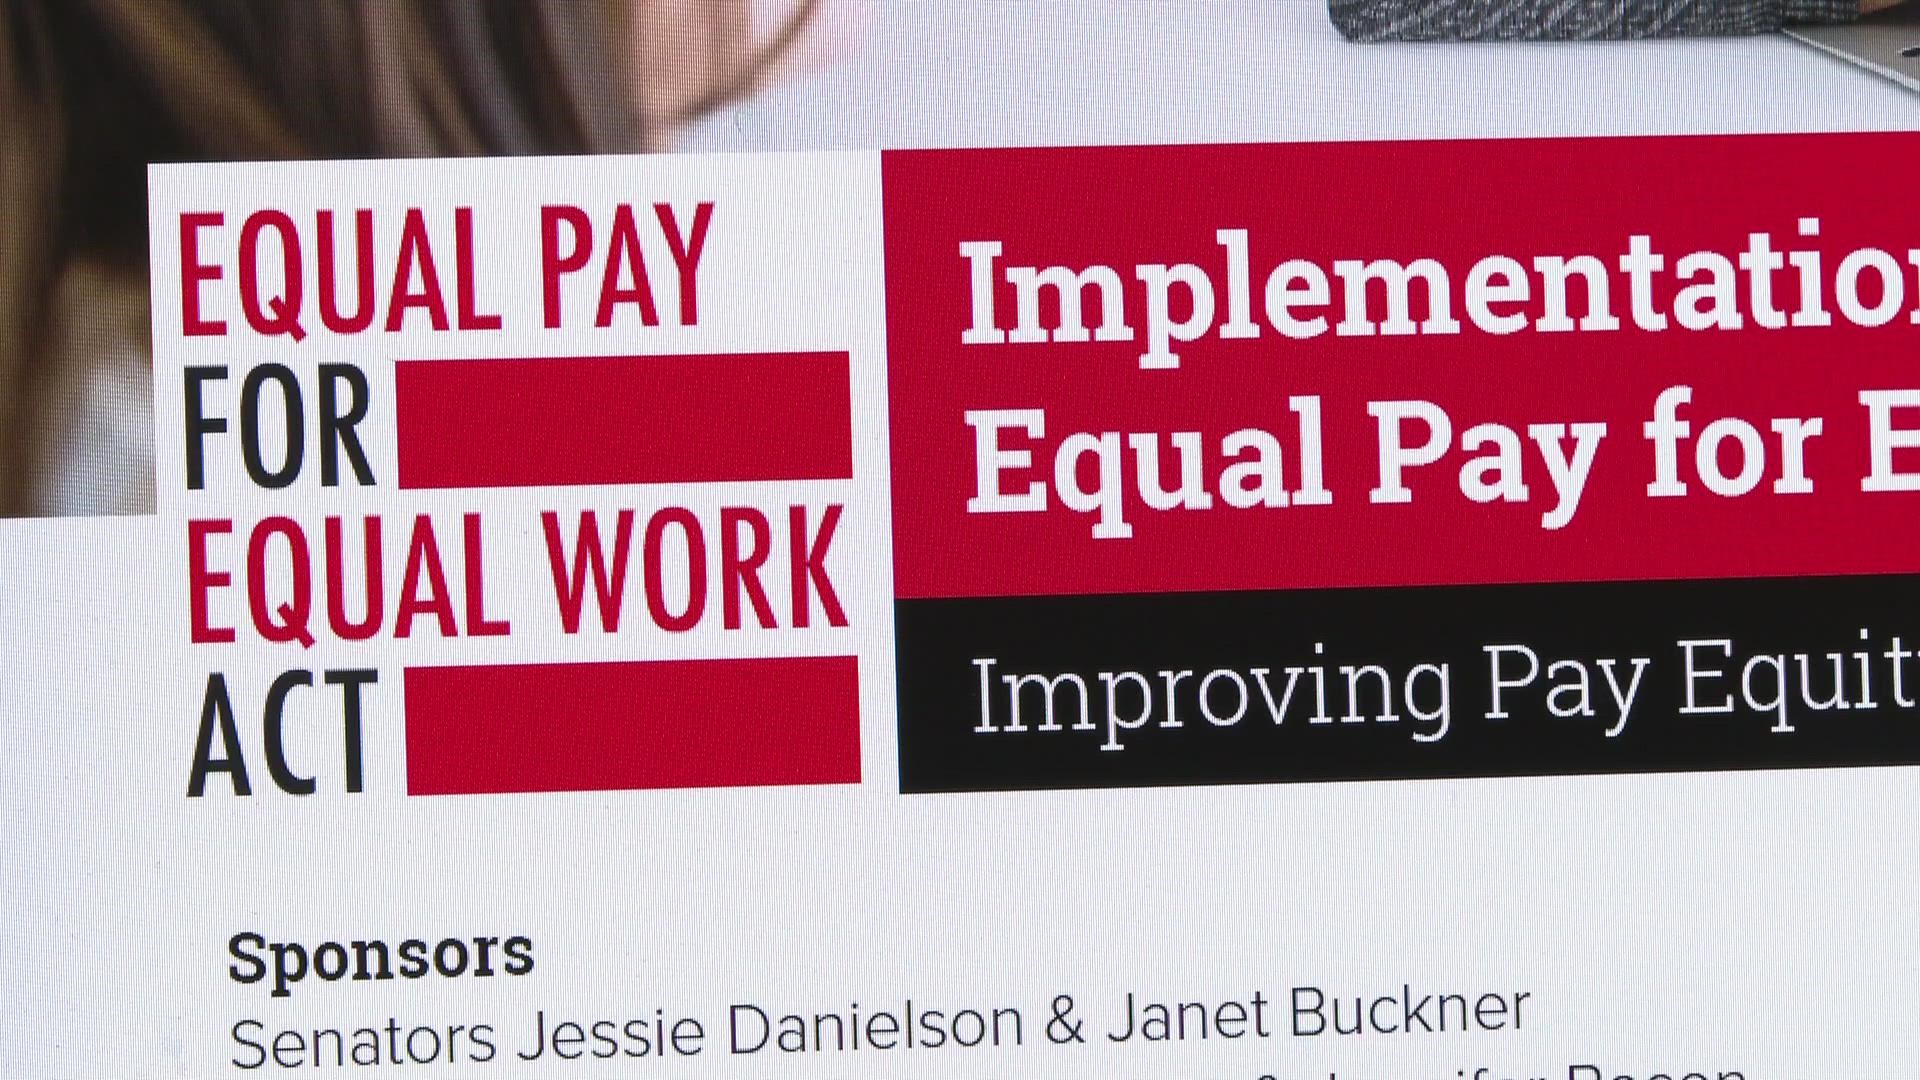 A new bill up for consideration in the state legislature intends to expand upon the original 'Equal Pay for Equal Work Act' -- which was passed before the pandemic.